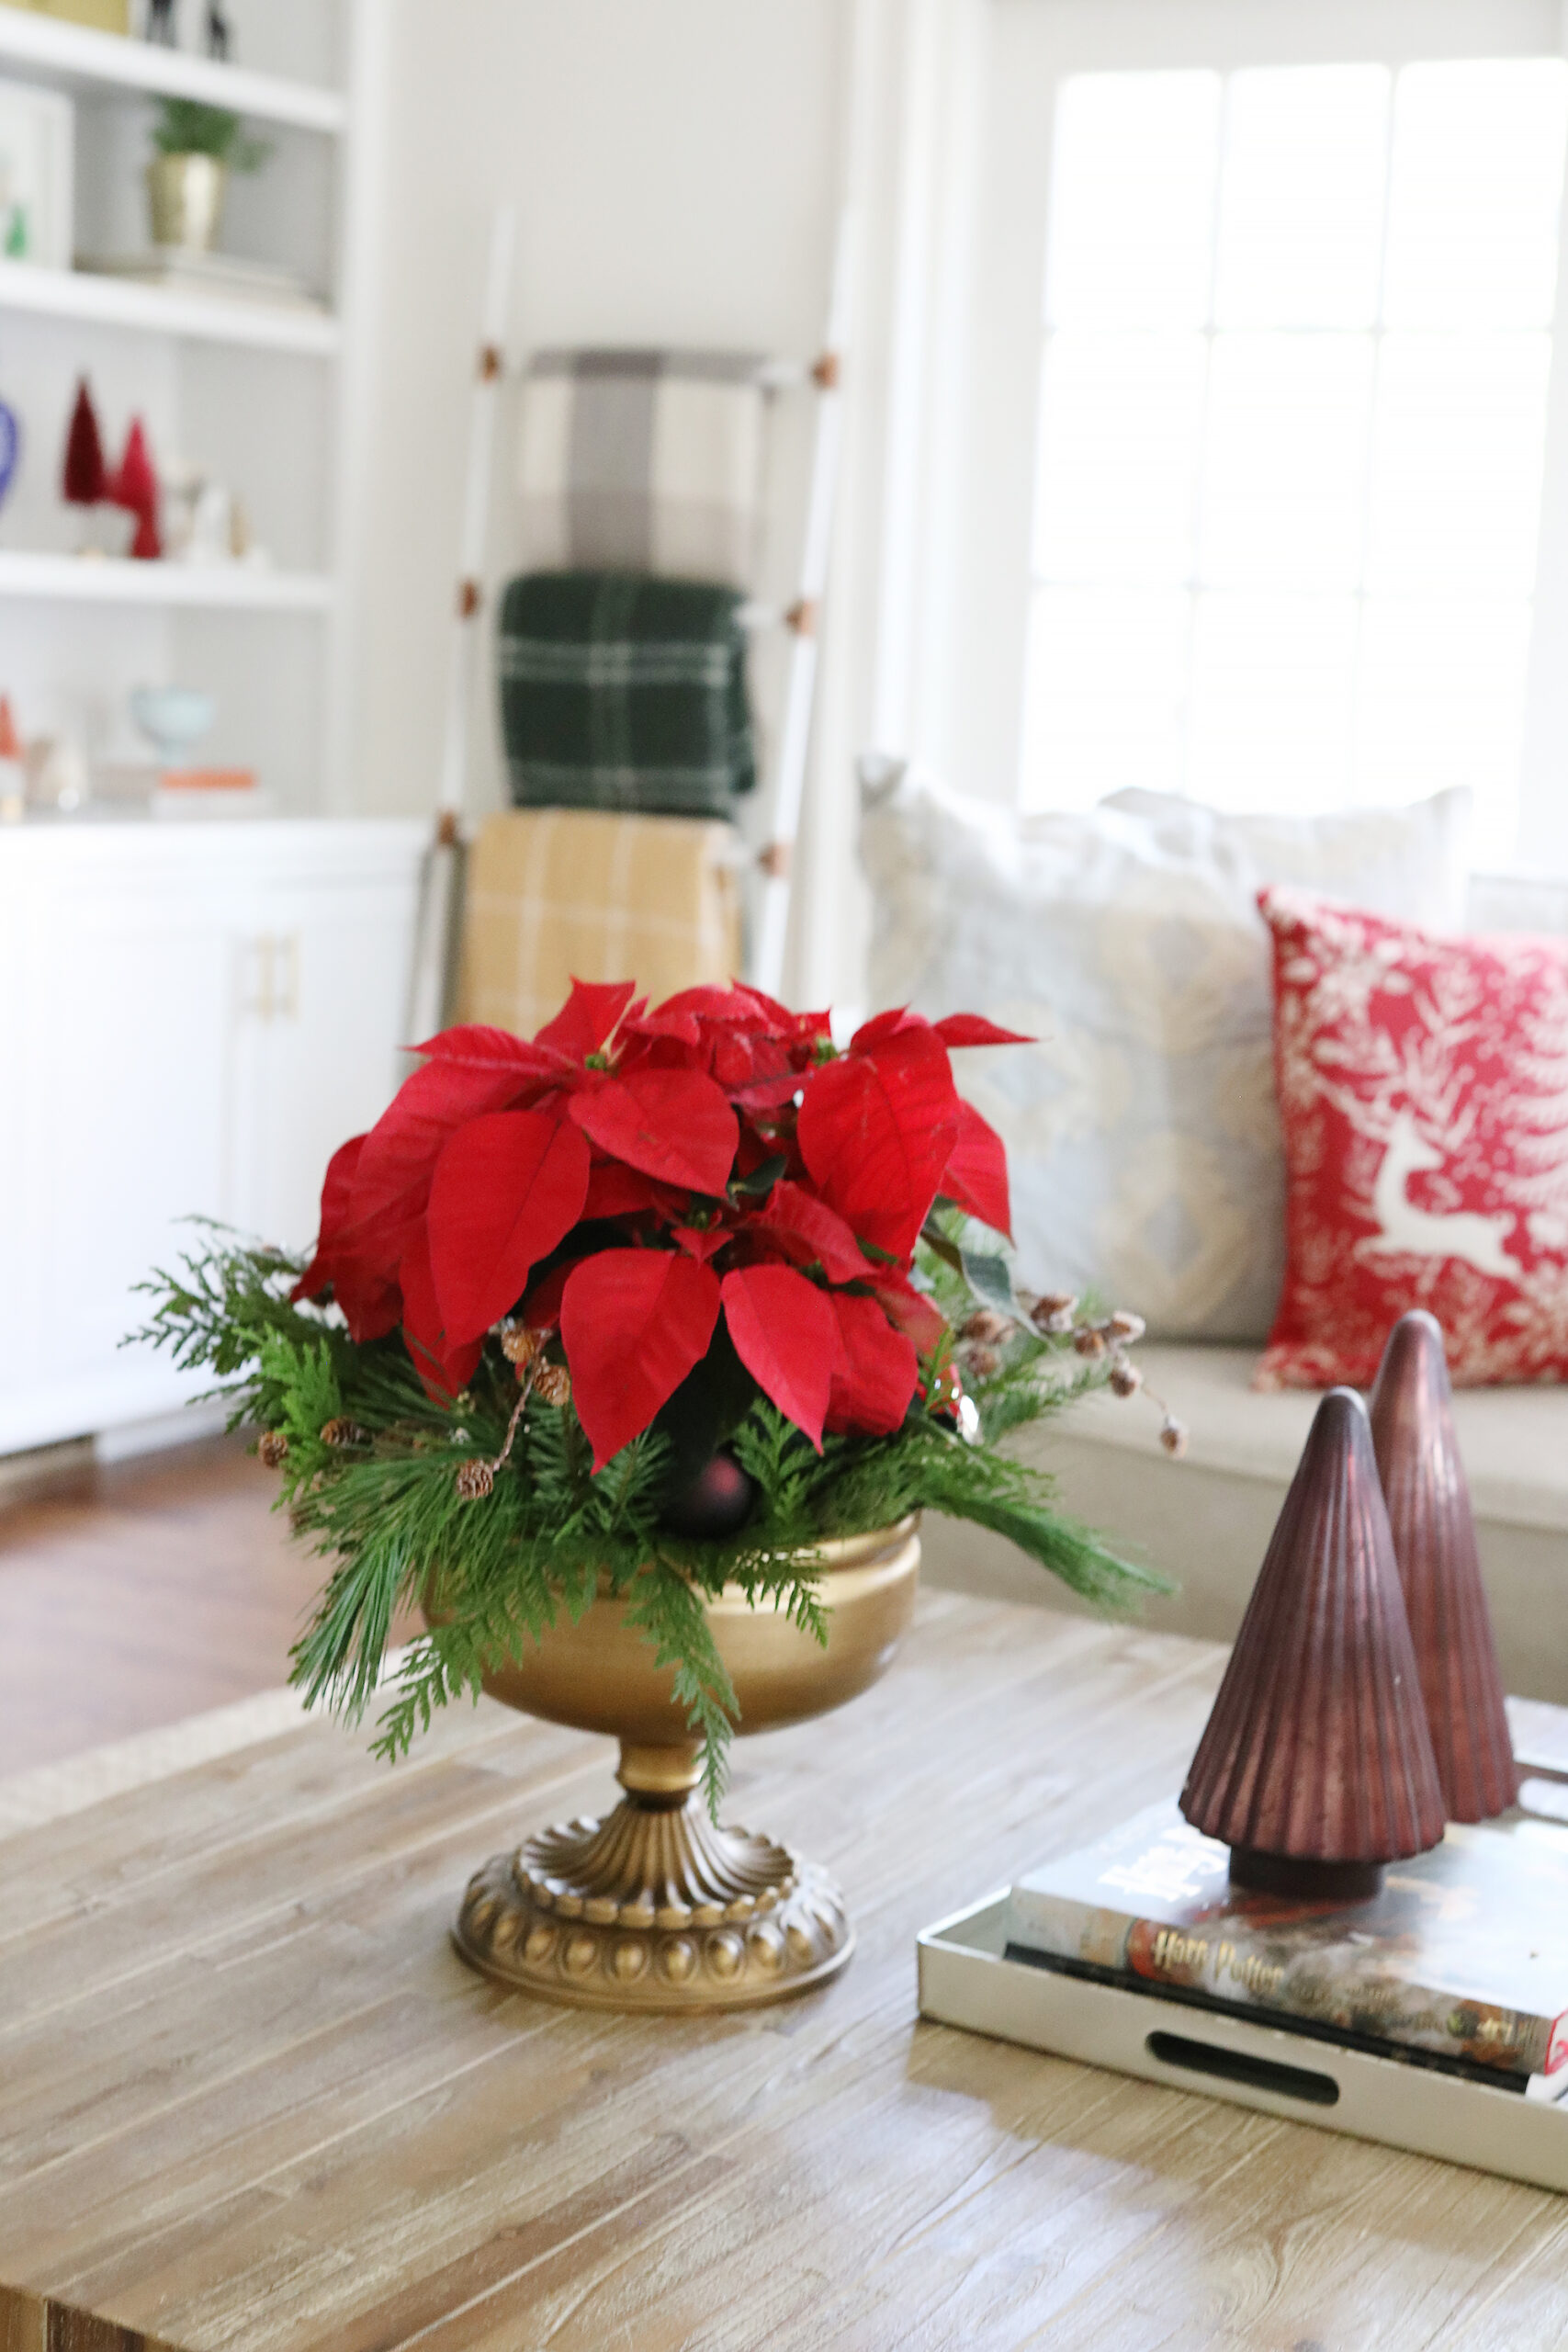 Give your Poinsettias an Upgrade by Making These Pretty Christmas Poinsettia Centerpieces to elevate your holiday decorations! || Darling Darleen Top CT Lifestyle Blogger